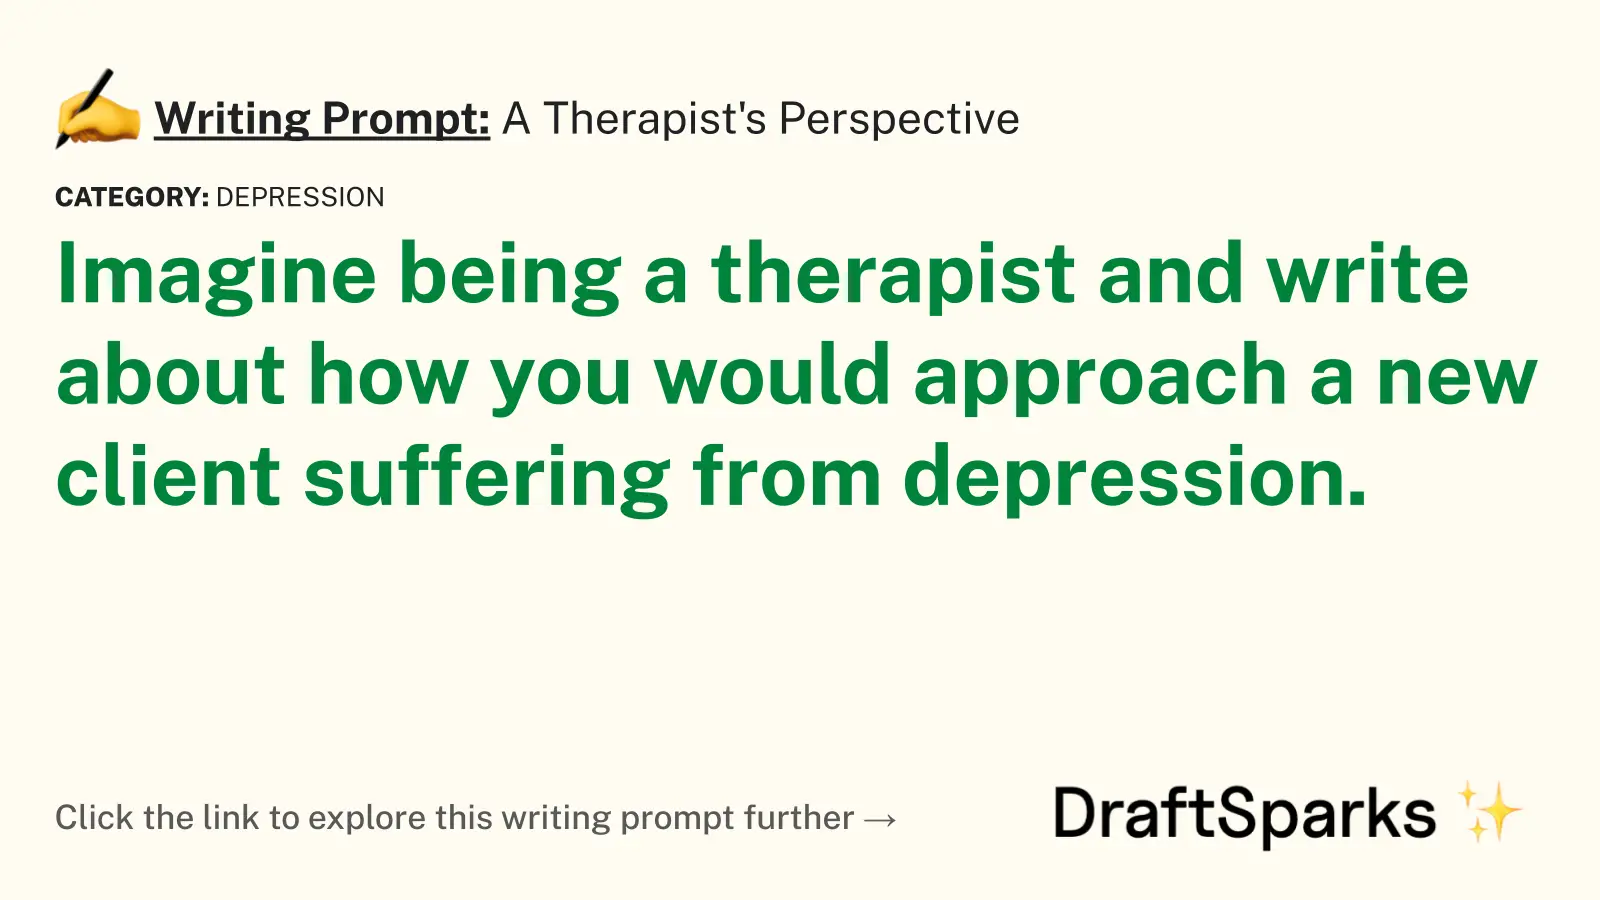 A Therapist’s Perspective